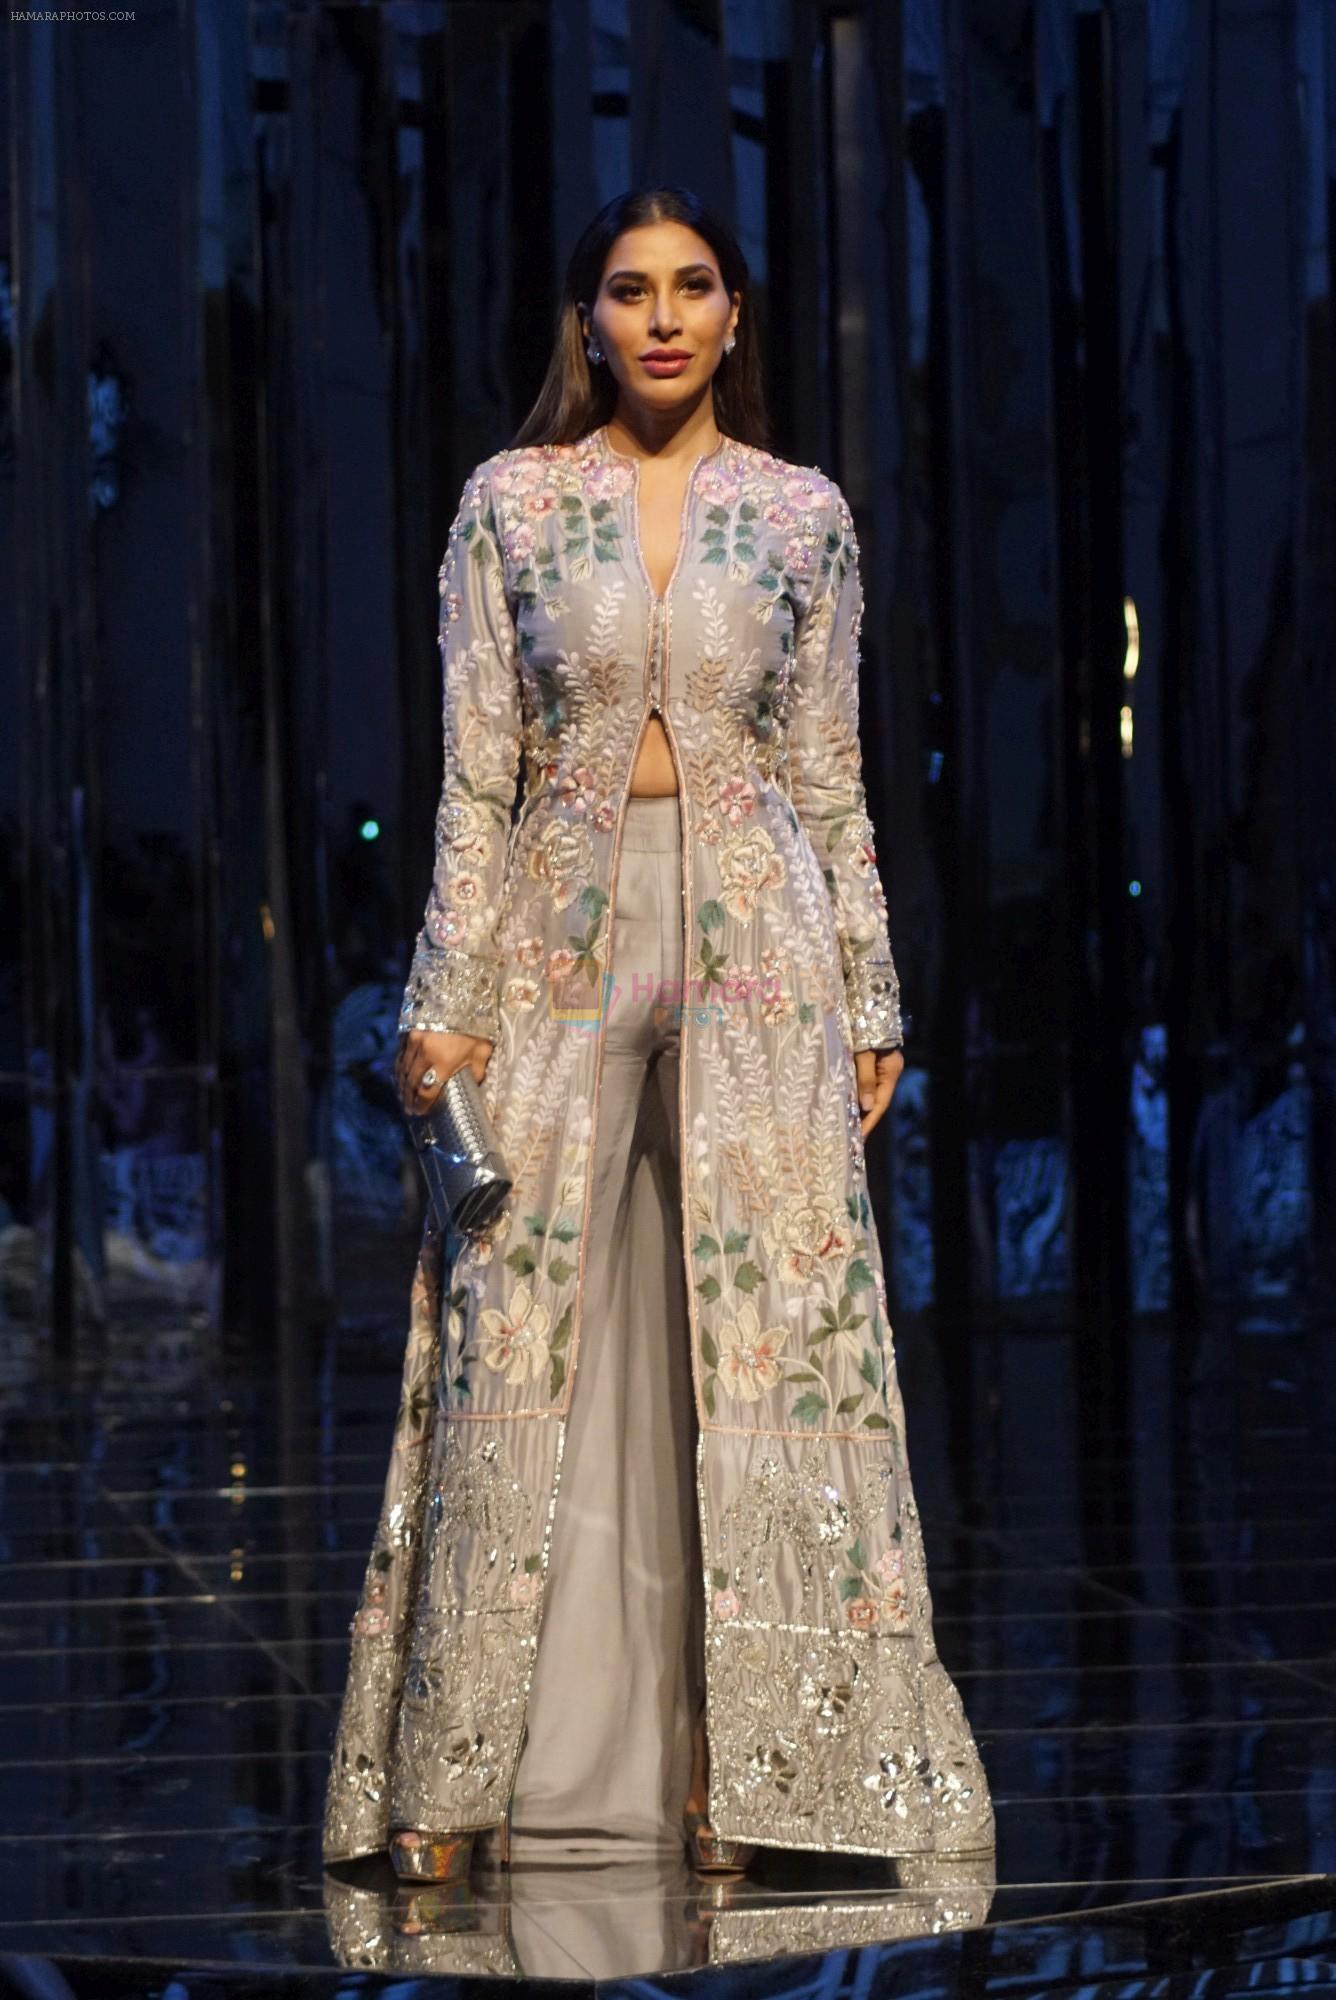 Sophie Chaudhary at Red Carpet for Manish Malhotra new collection Haute Couture on 1st Aug 2018